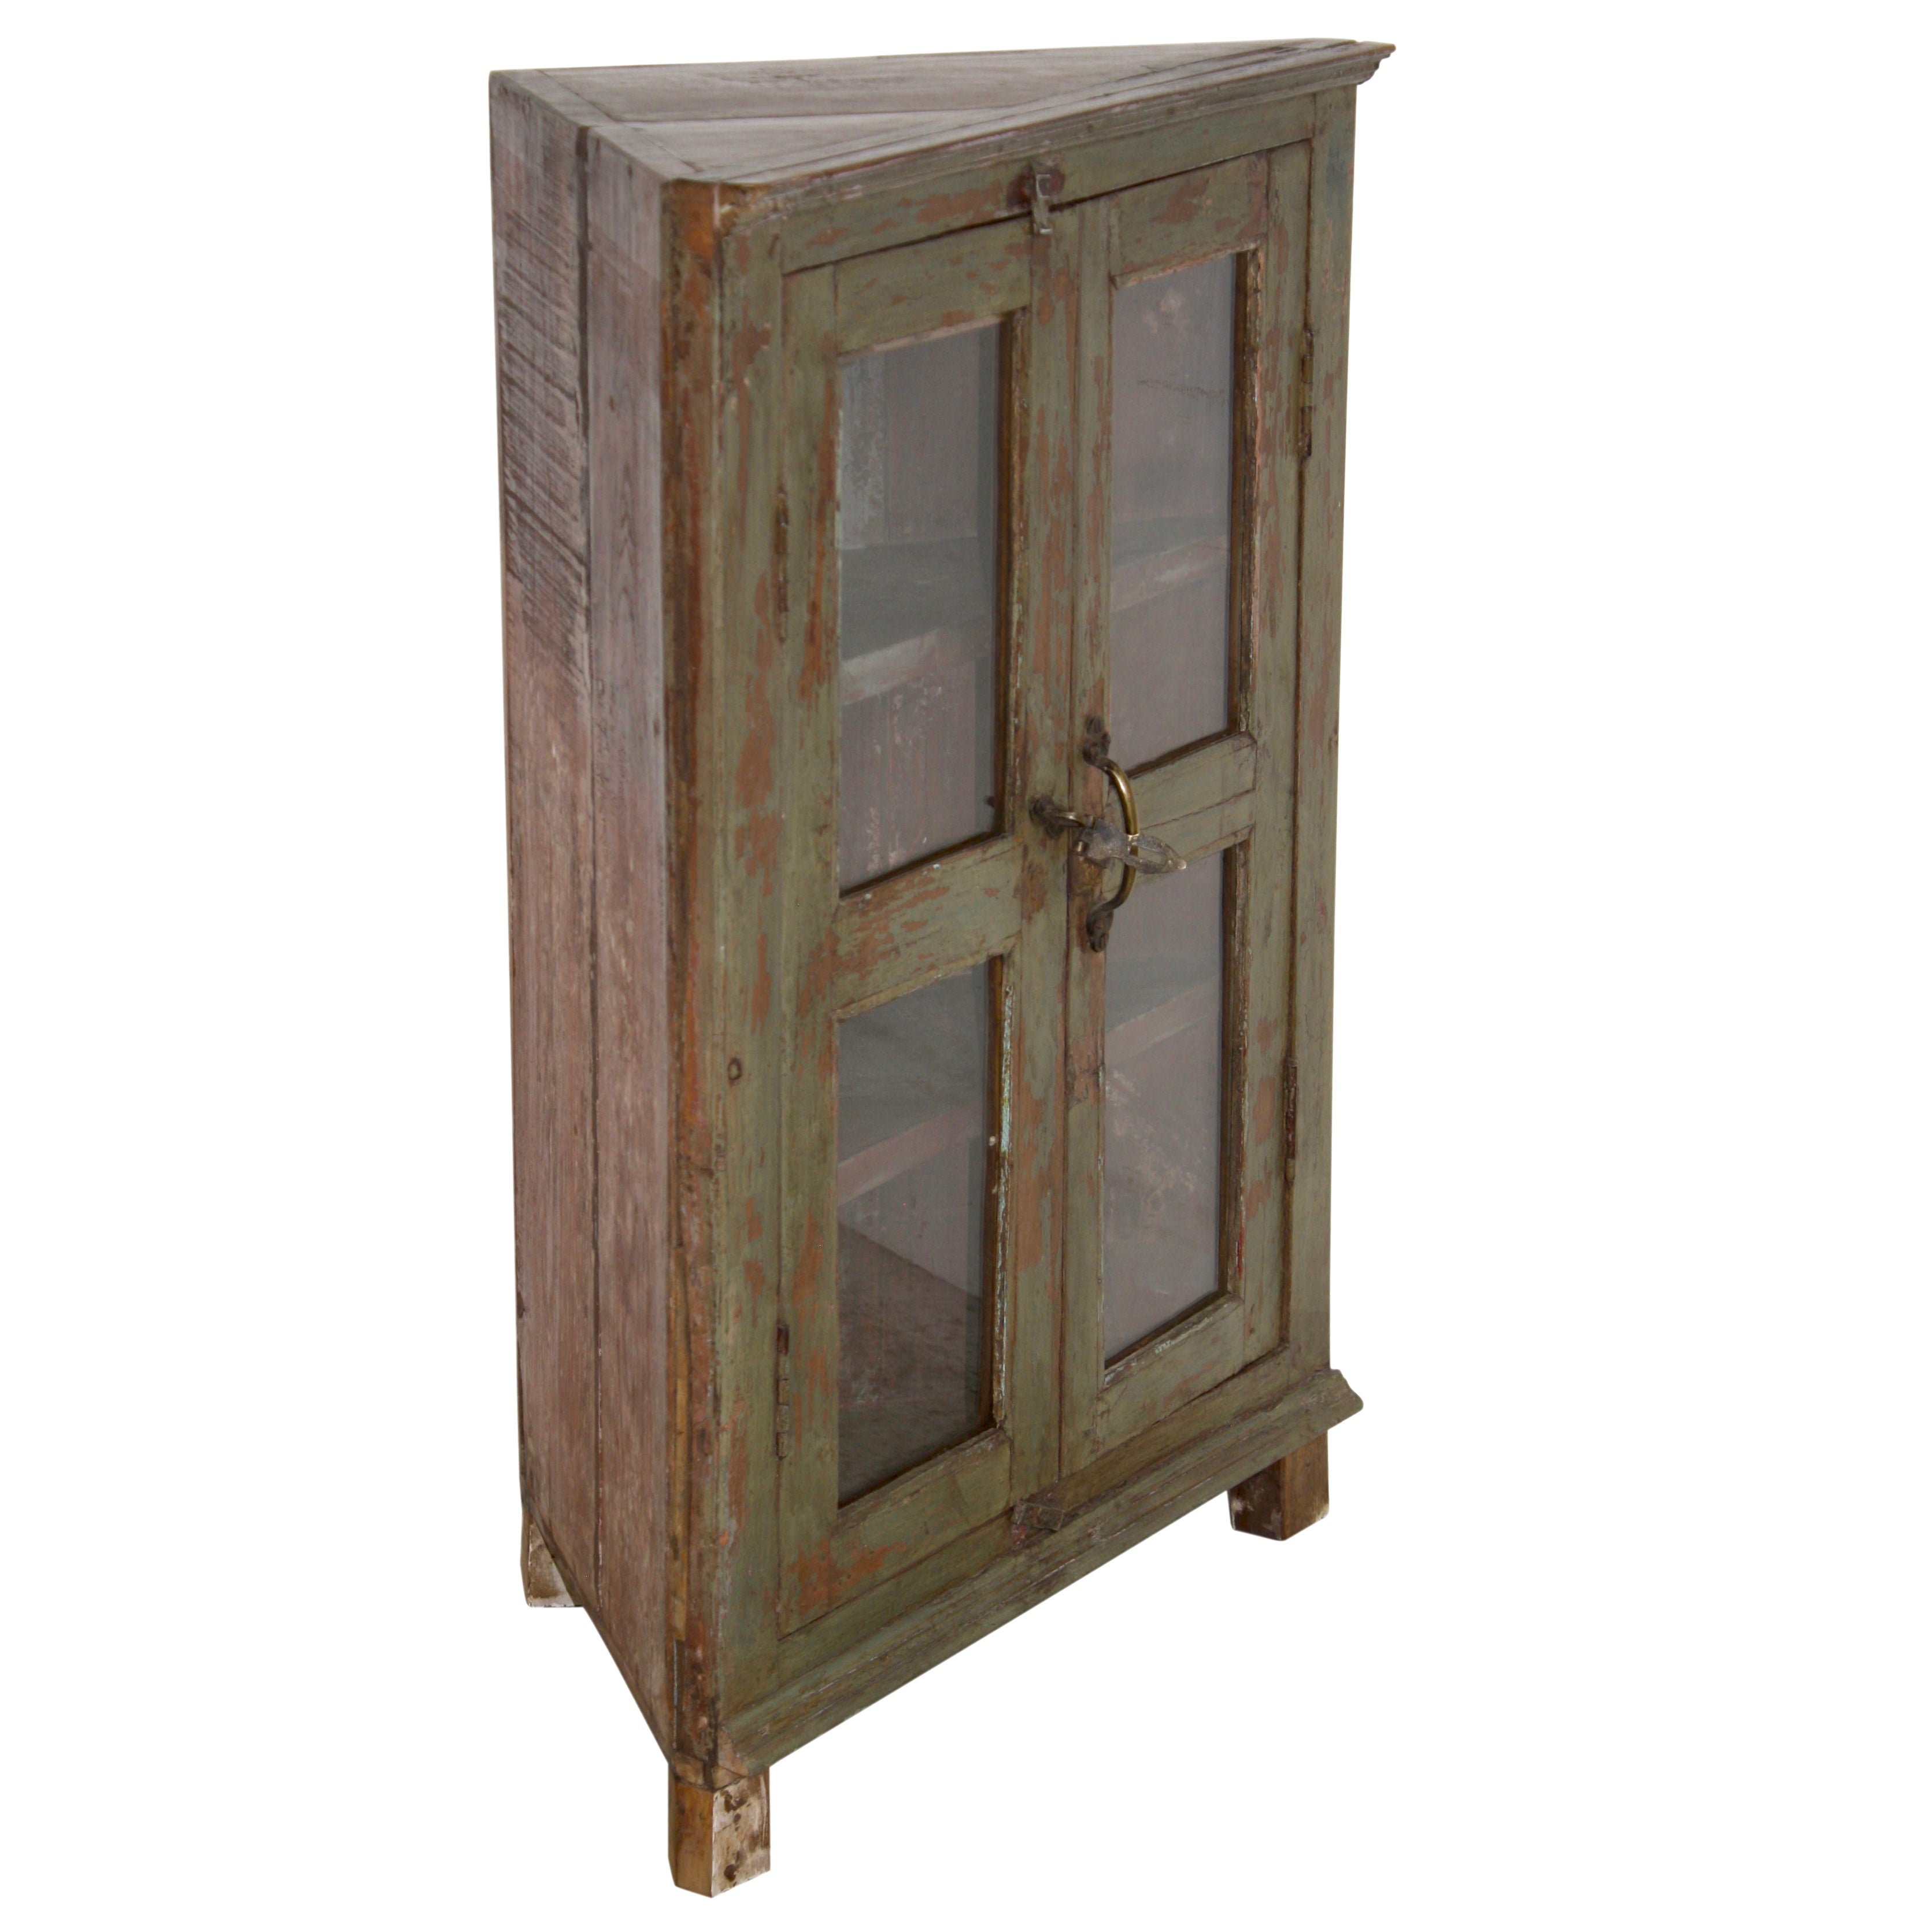 Short Painted Corner Cabinet with Glass Doors